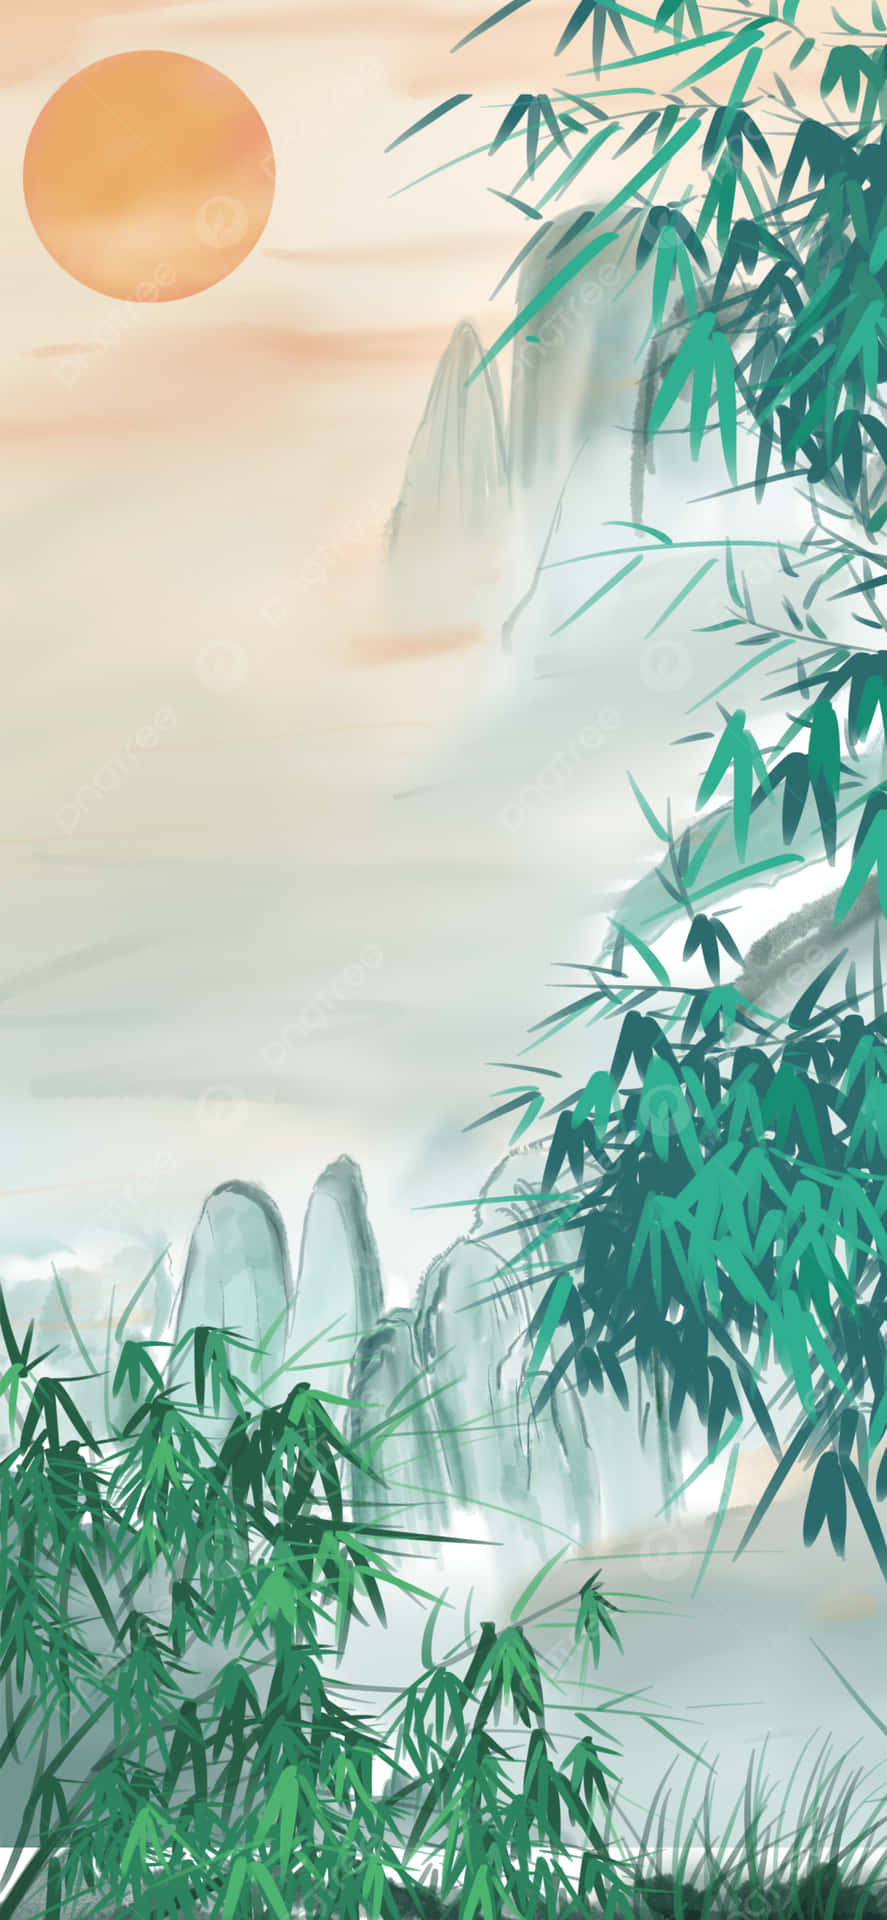 A Painting Of A Bamboo Forest With Mountains Wallpaper